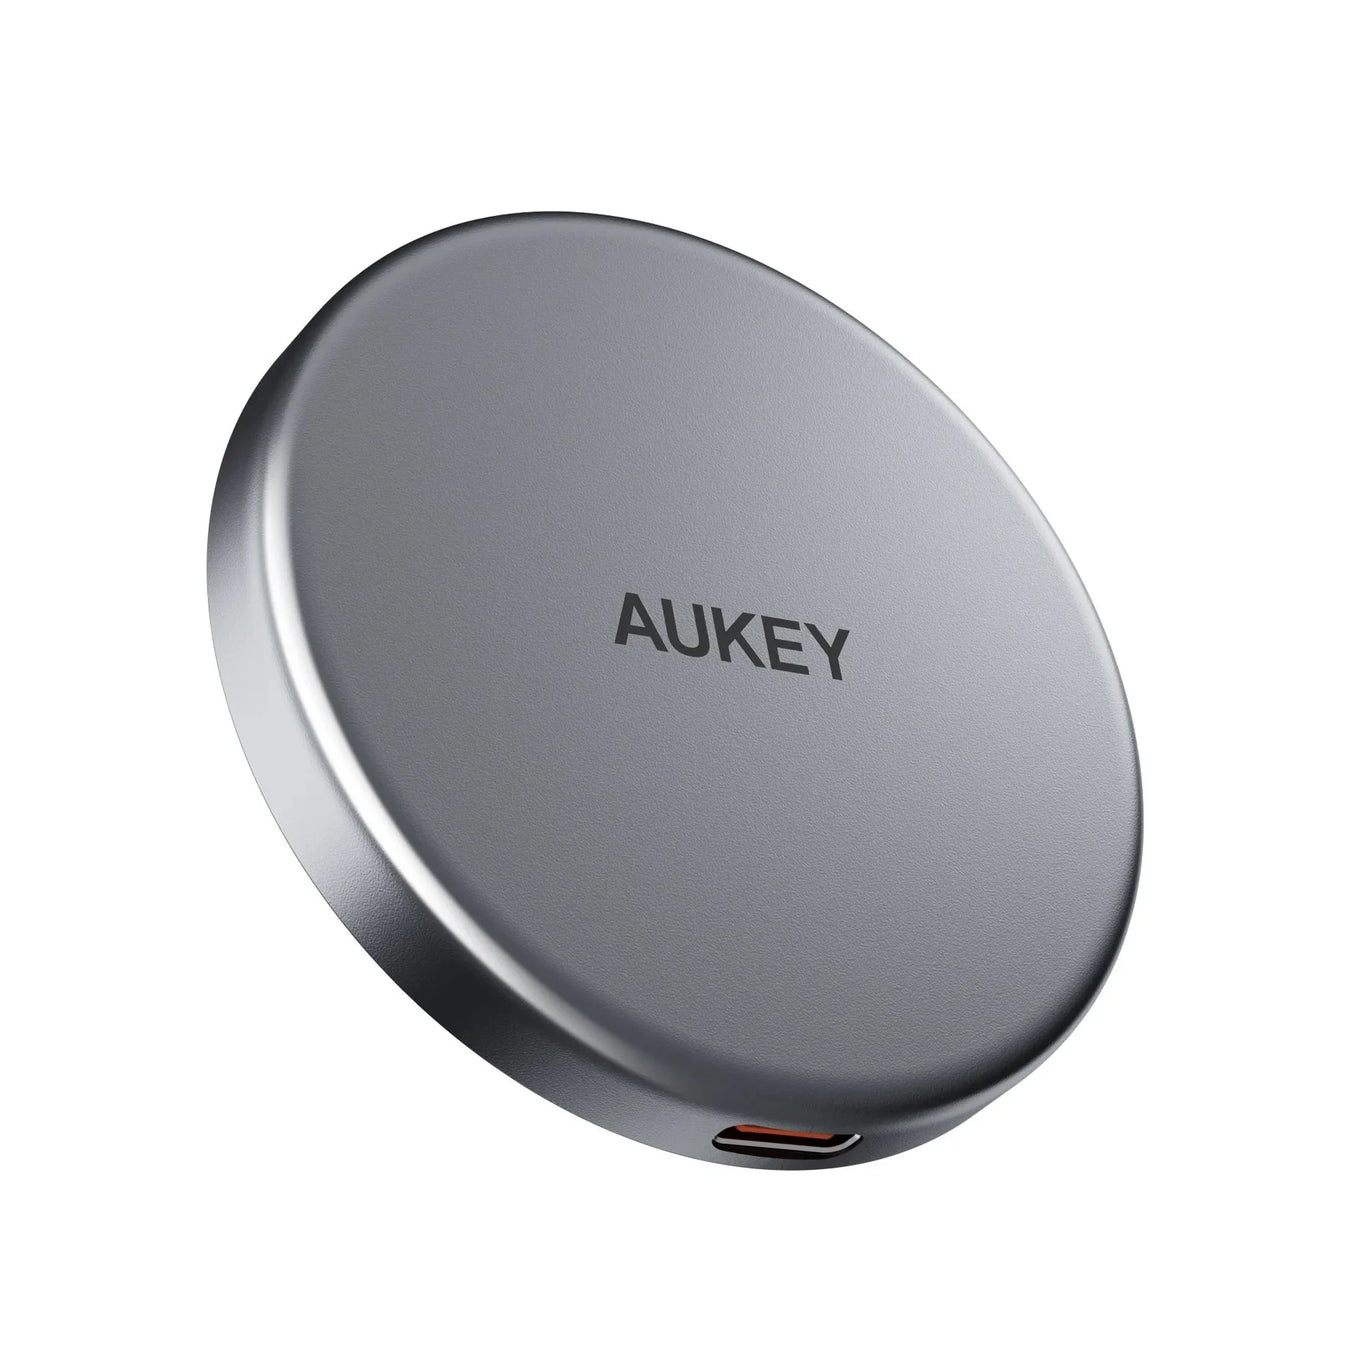 Aukey's Wireless Chargers